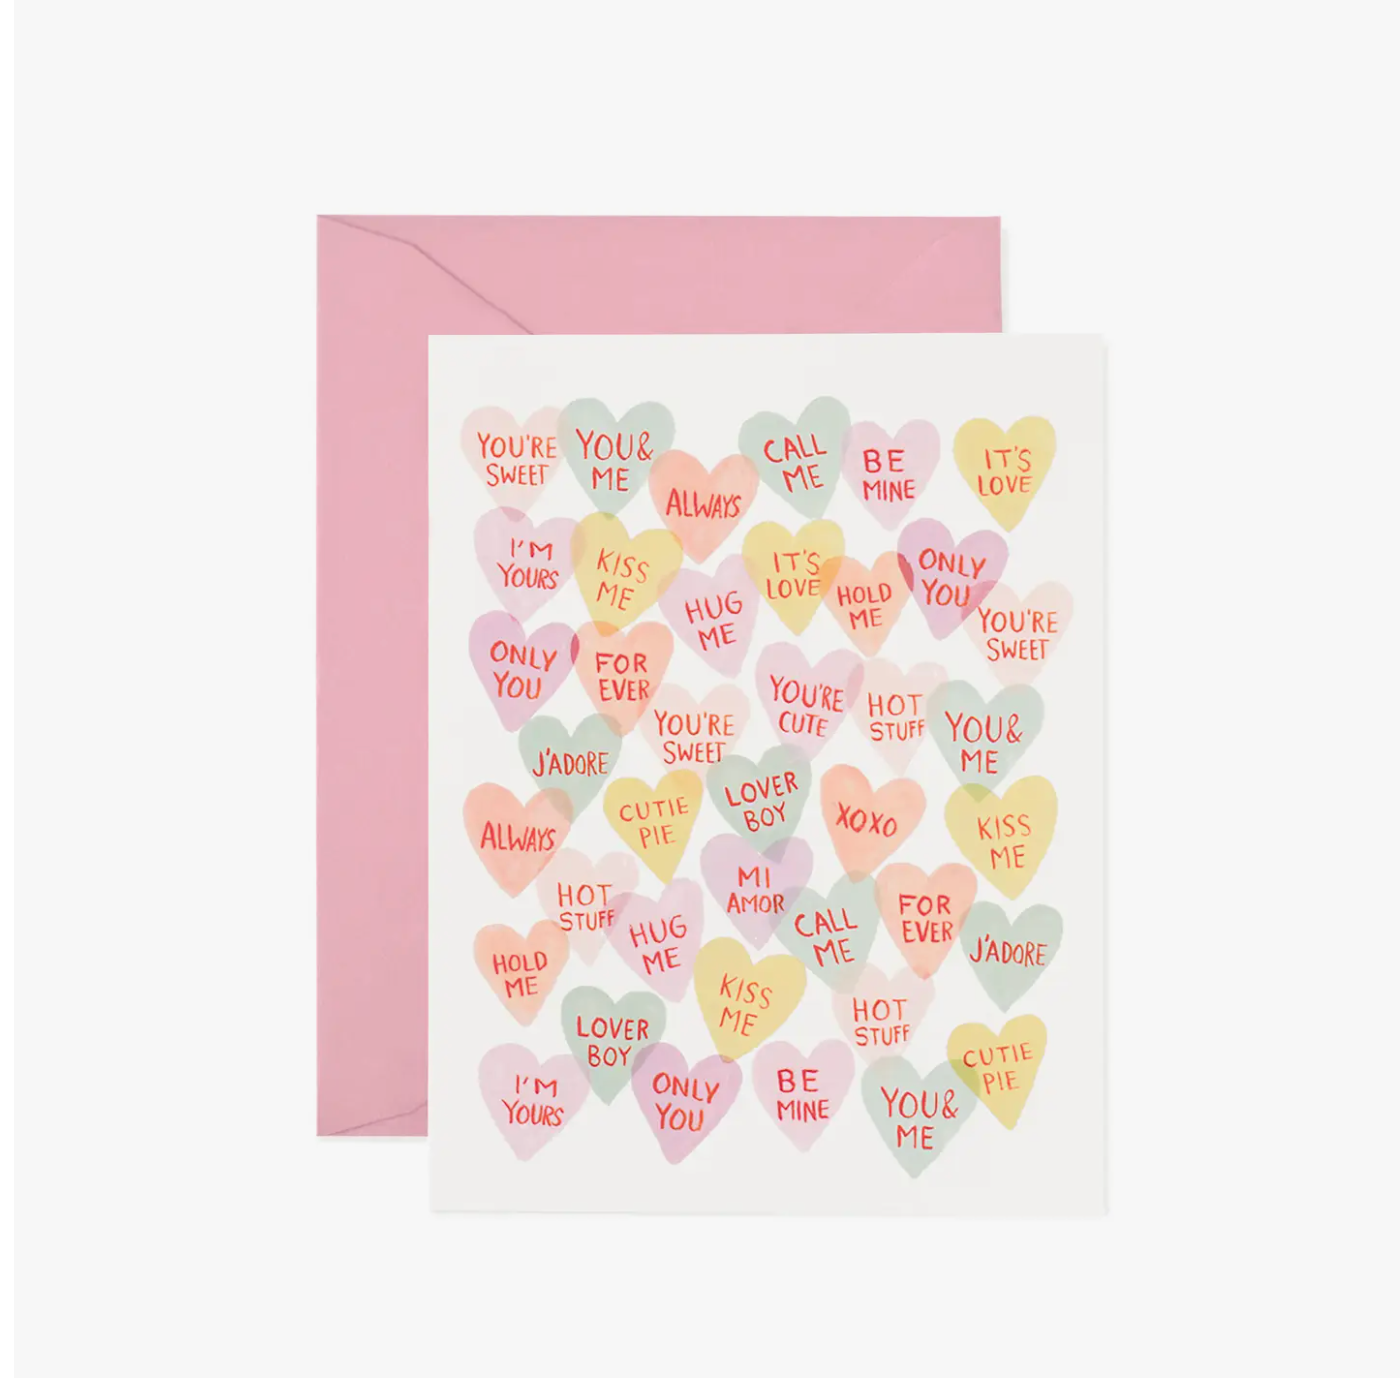 Boxed Set of Valentine Sweethearts Cards